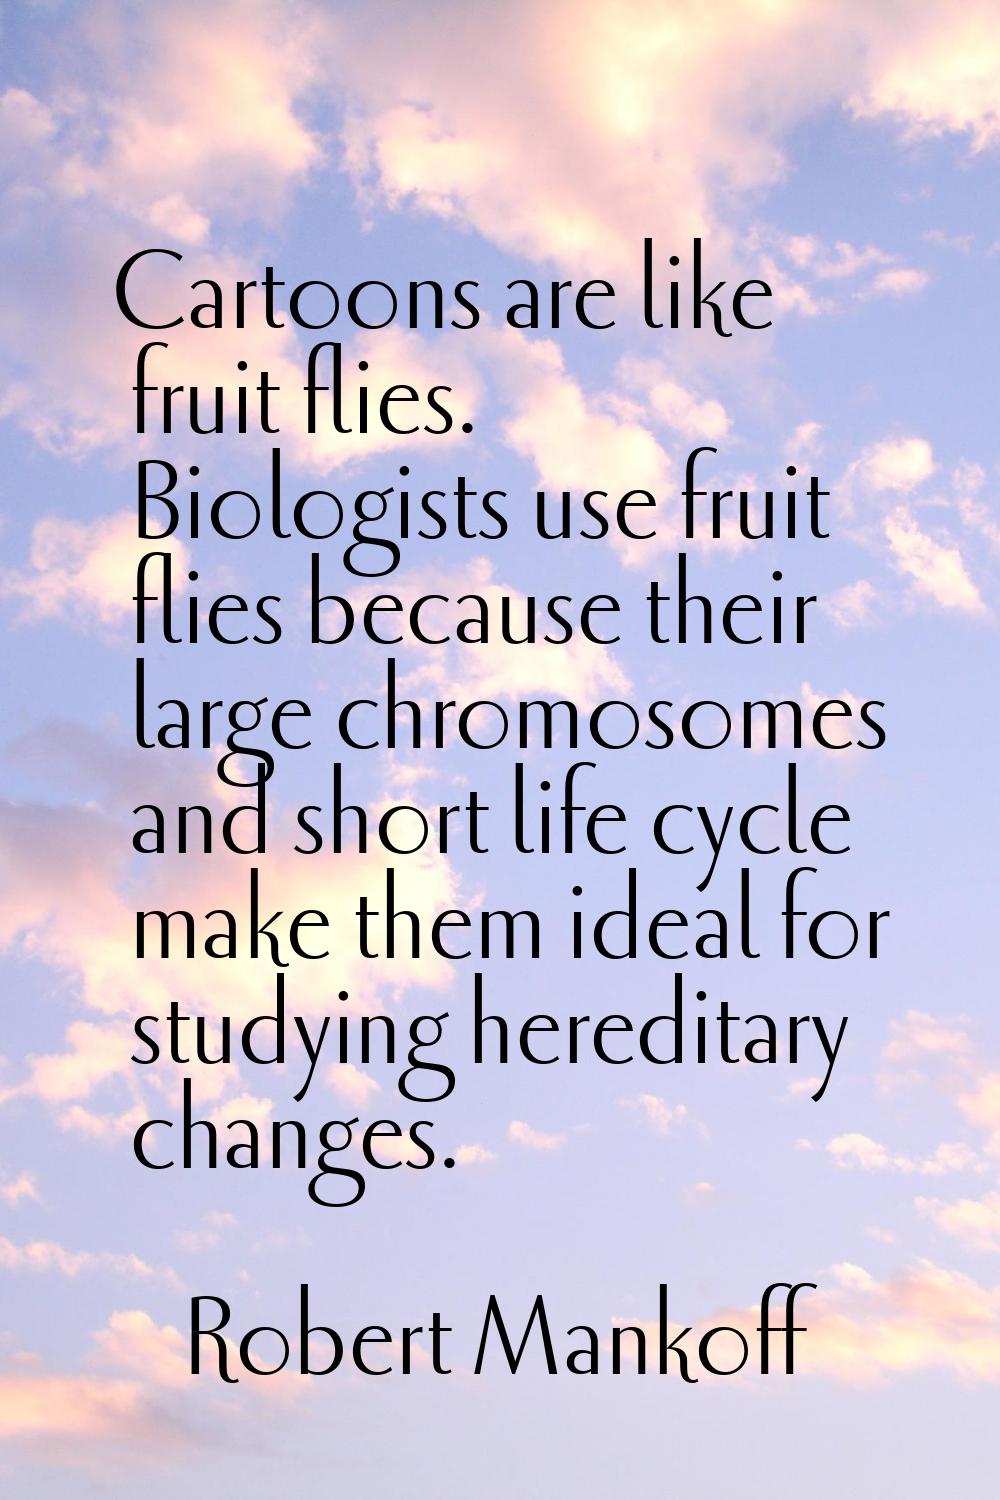 Cartoons are like fruit flies. Biologists use fruit flies because their large chromosomes and short